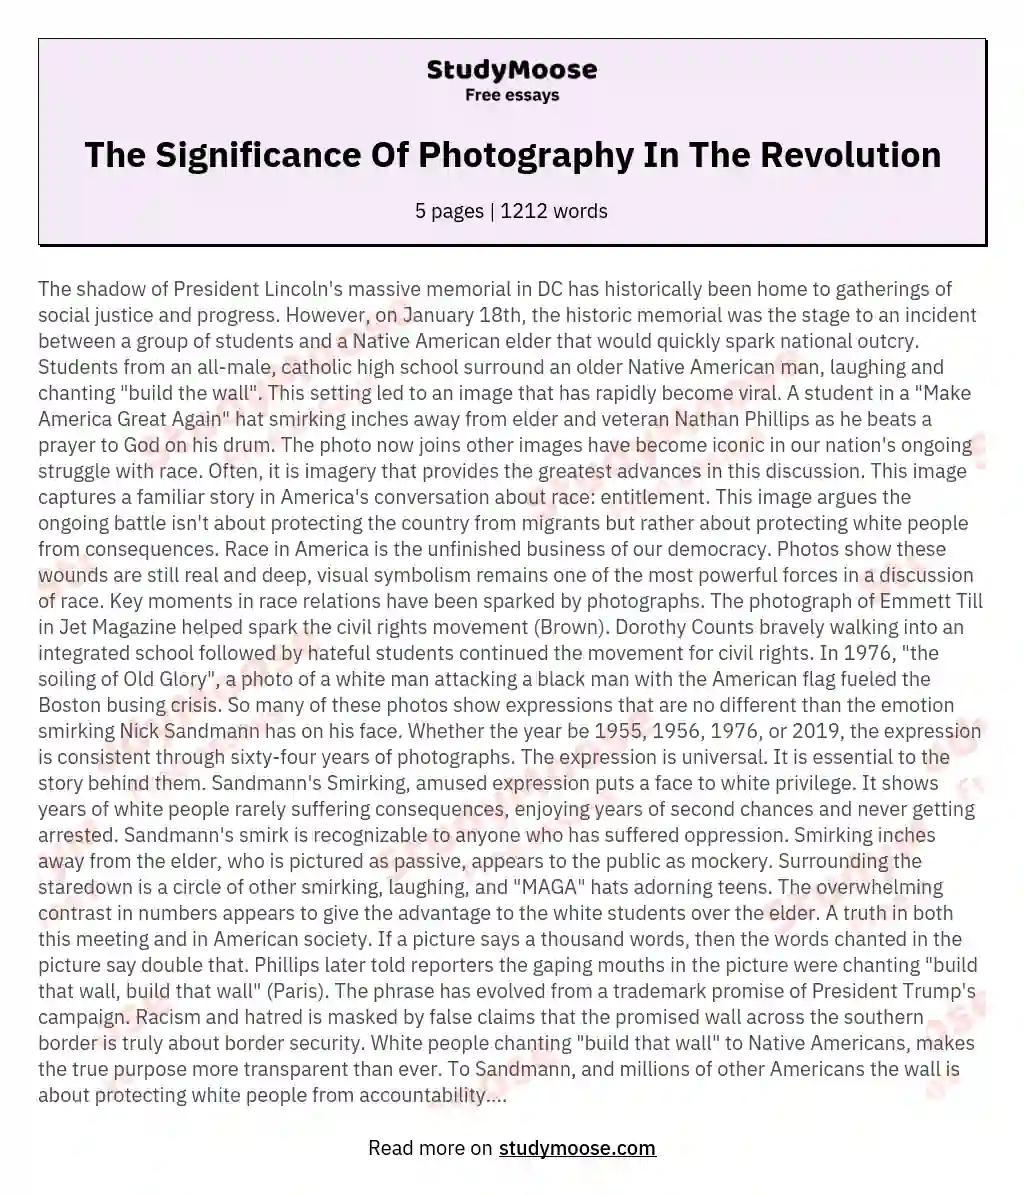 The Significance Of Photography In The Revolution essay